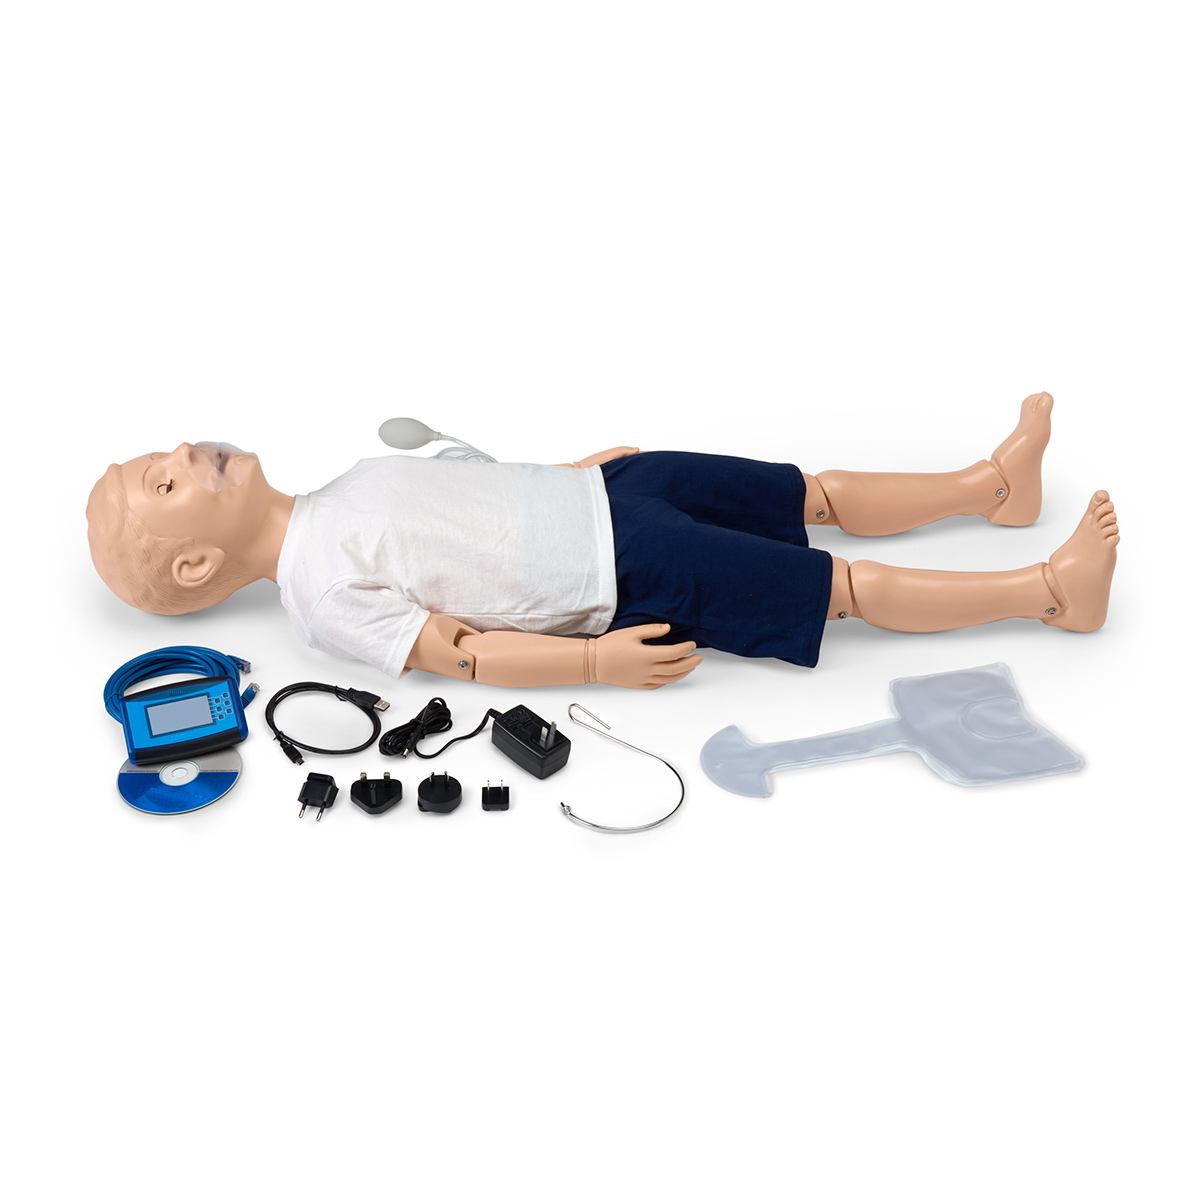 New products in Basic life support (BLS) for children